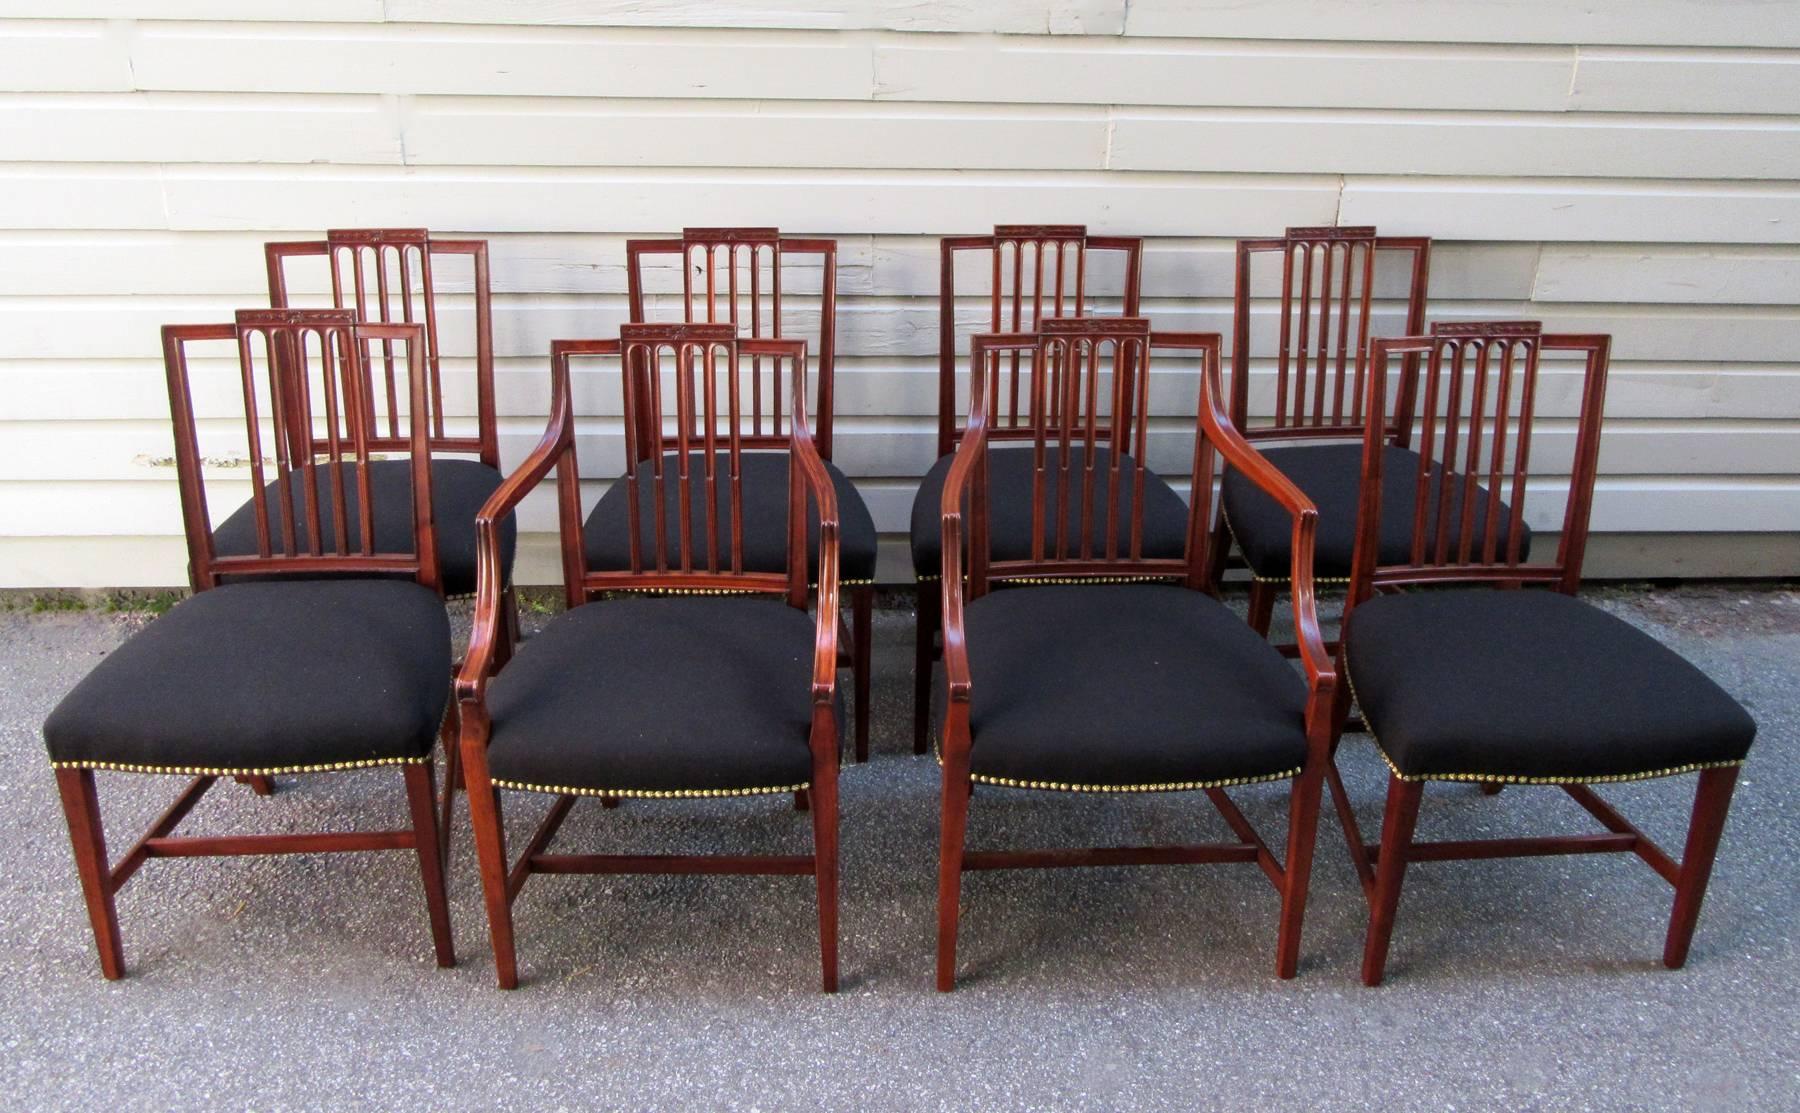 A fine set of eight Hepplewhite mahogany dining chairs made in England, circa 1790, with two armchairs and six side chairs featuring new black brushed cotton upholstery finished with nail head trim. One of the side chairs is a reproduction made in